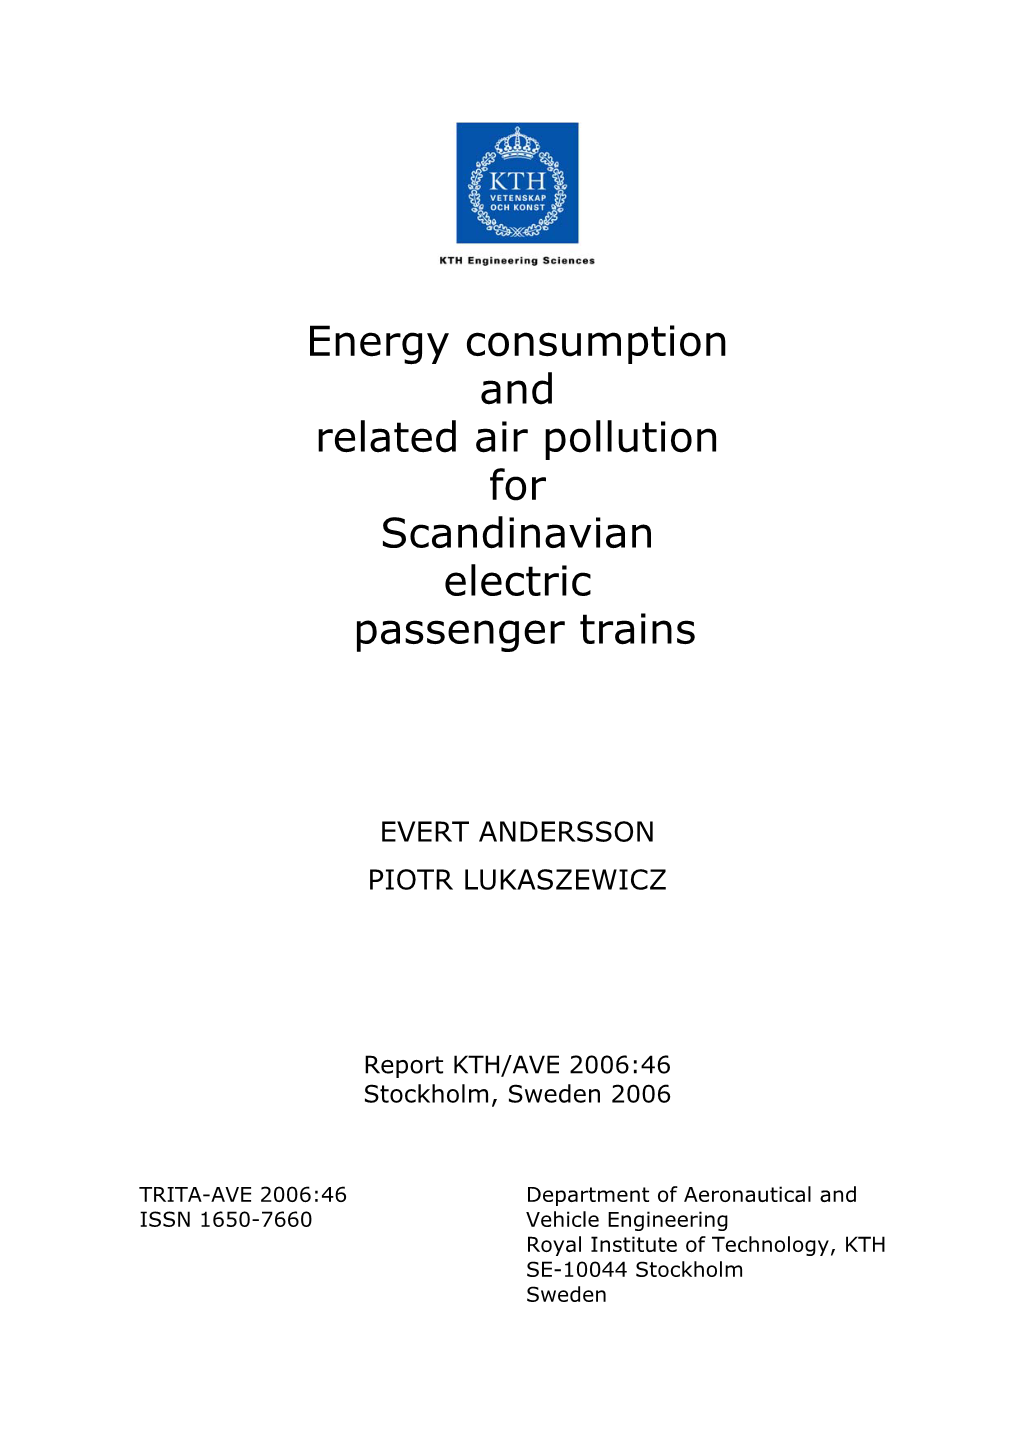 Energy Consumption and Related Air Pollution for Scandinavian Electric Passenger Trains